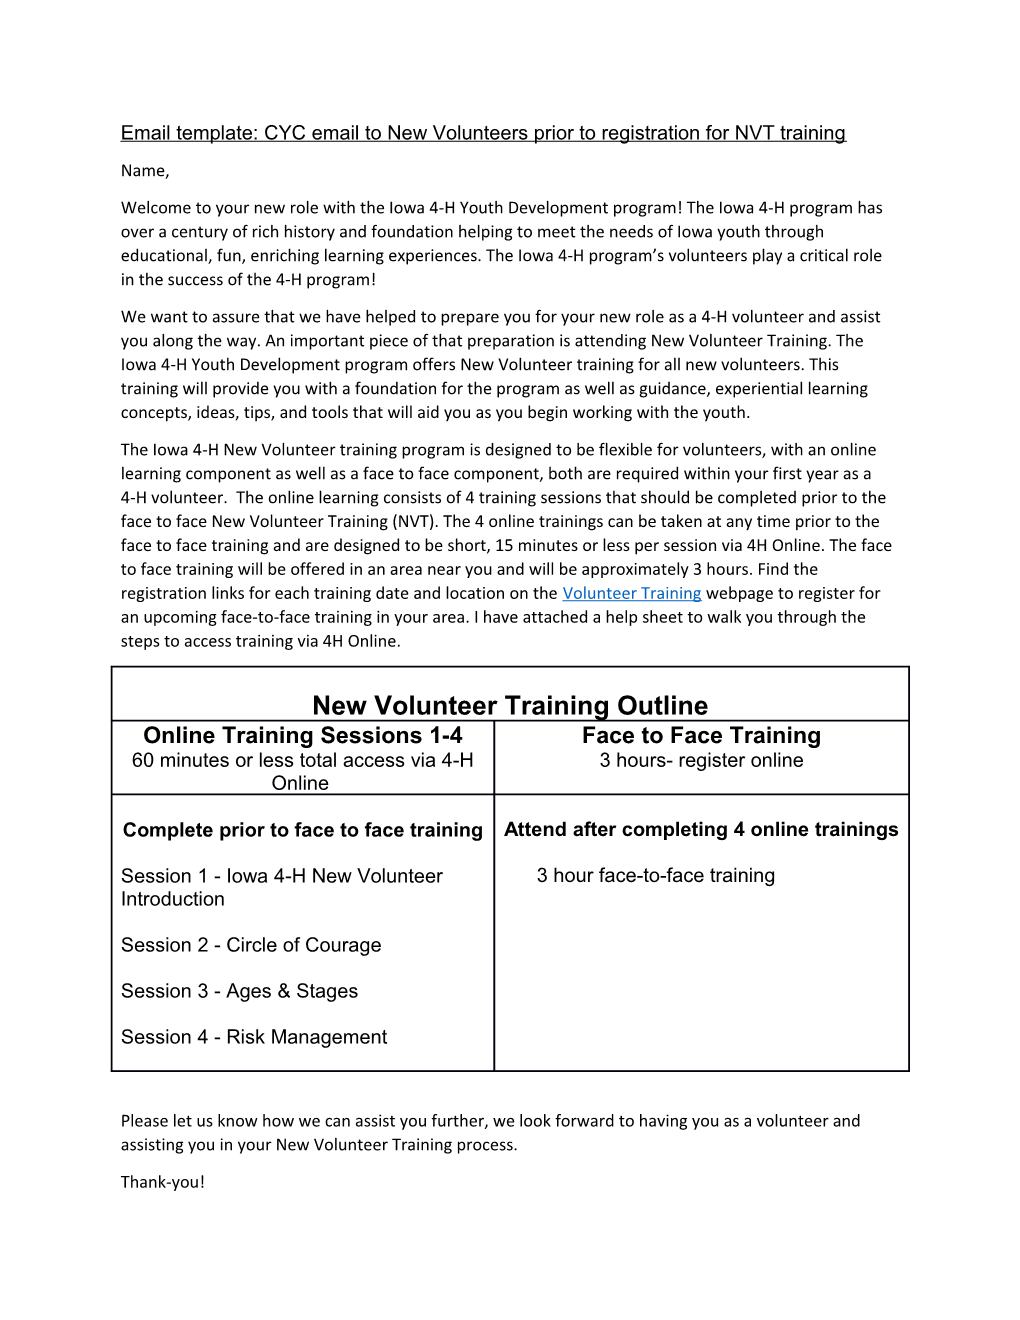 Email Template: CYC Email to New Volunteers Prior to Registration for NVT Training